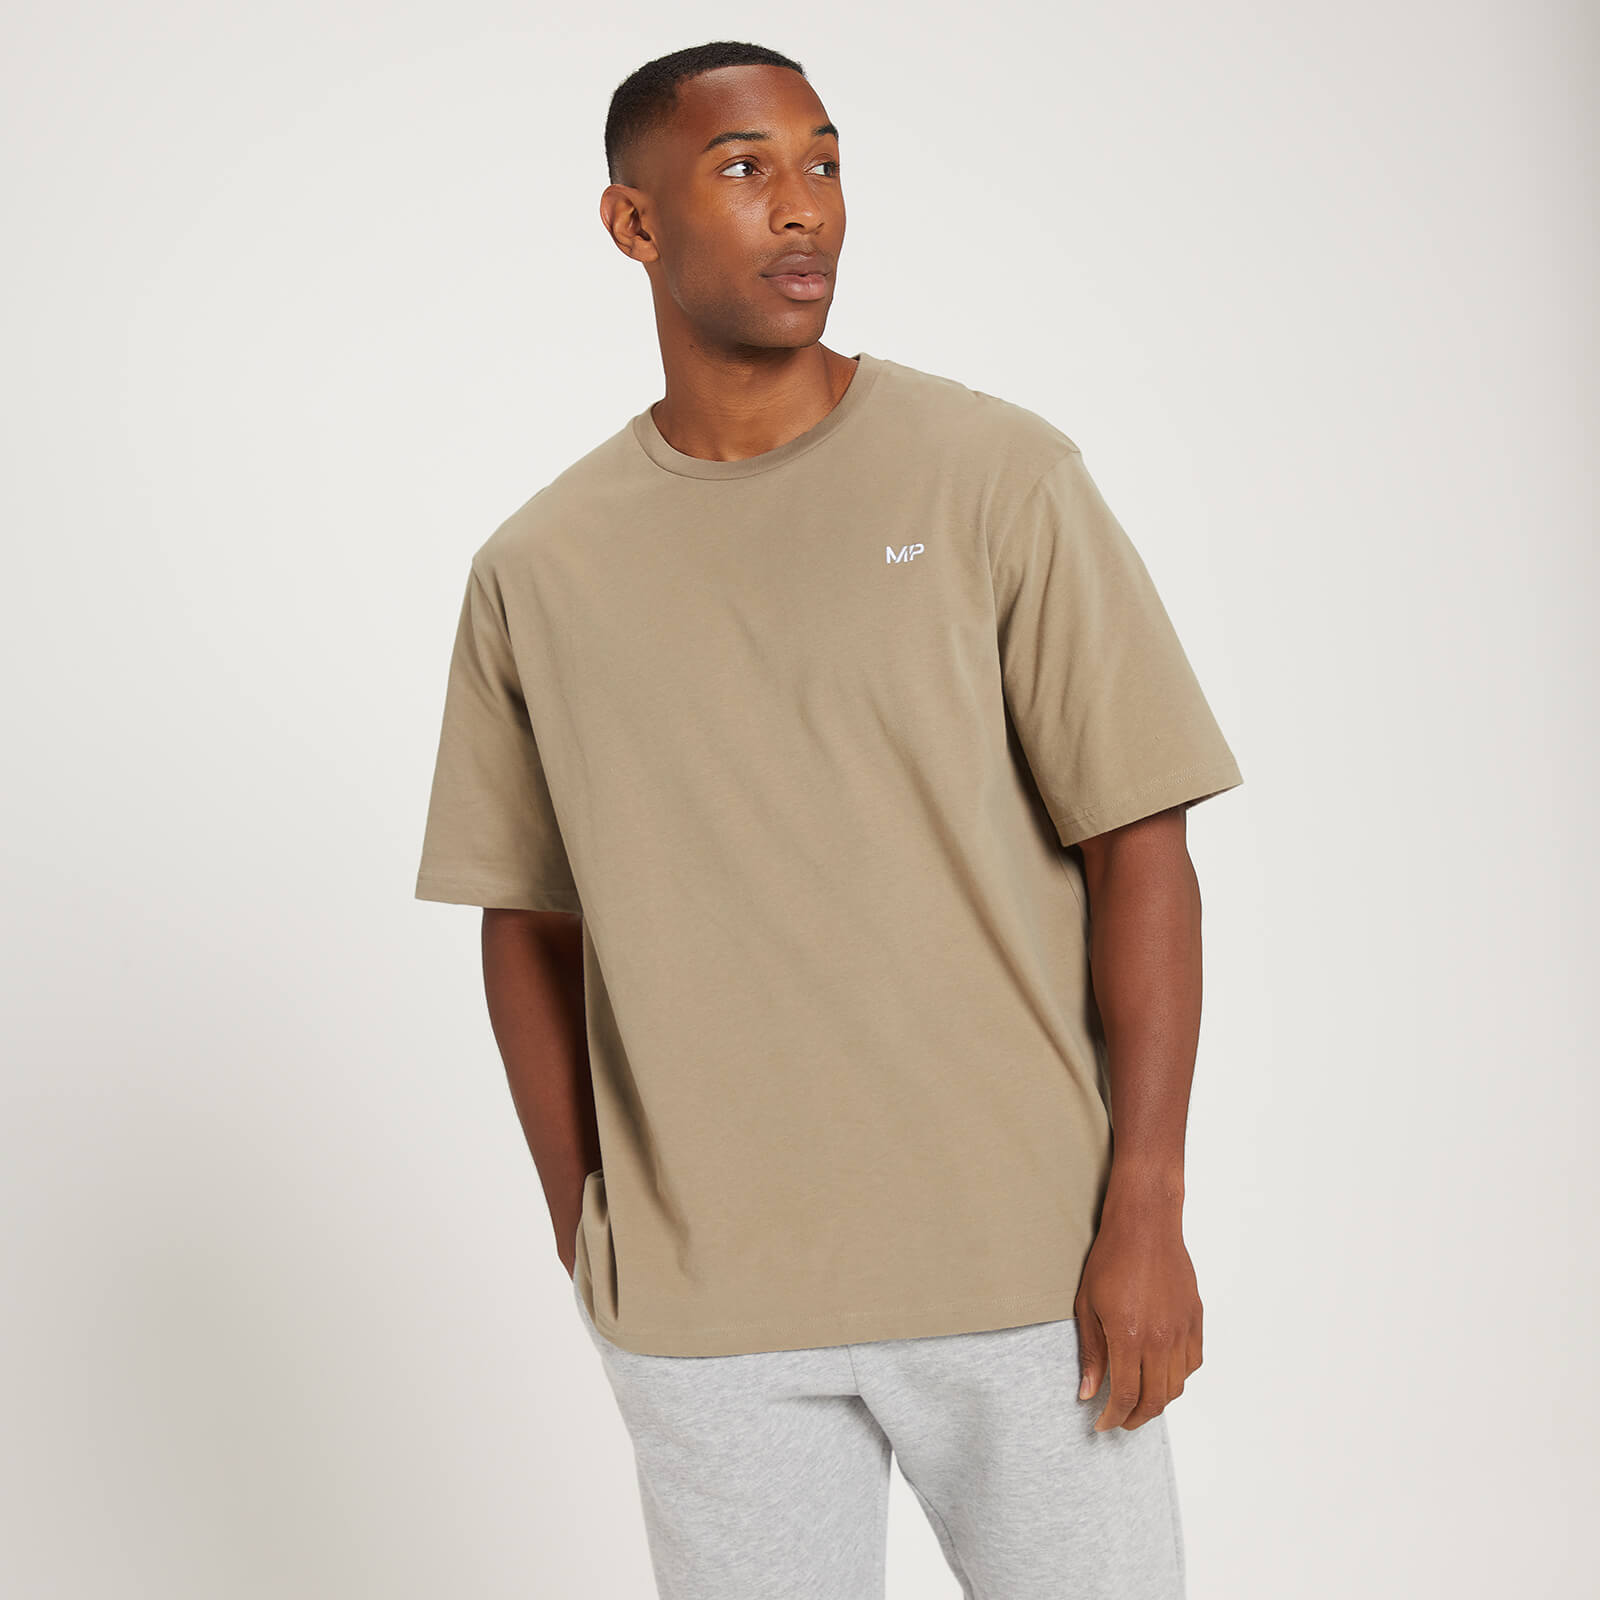 MP Men's Oversized T-Shirt - Taupe - XS